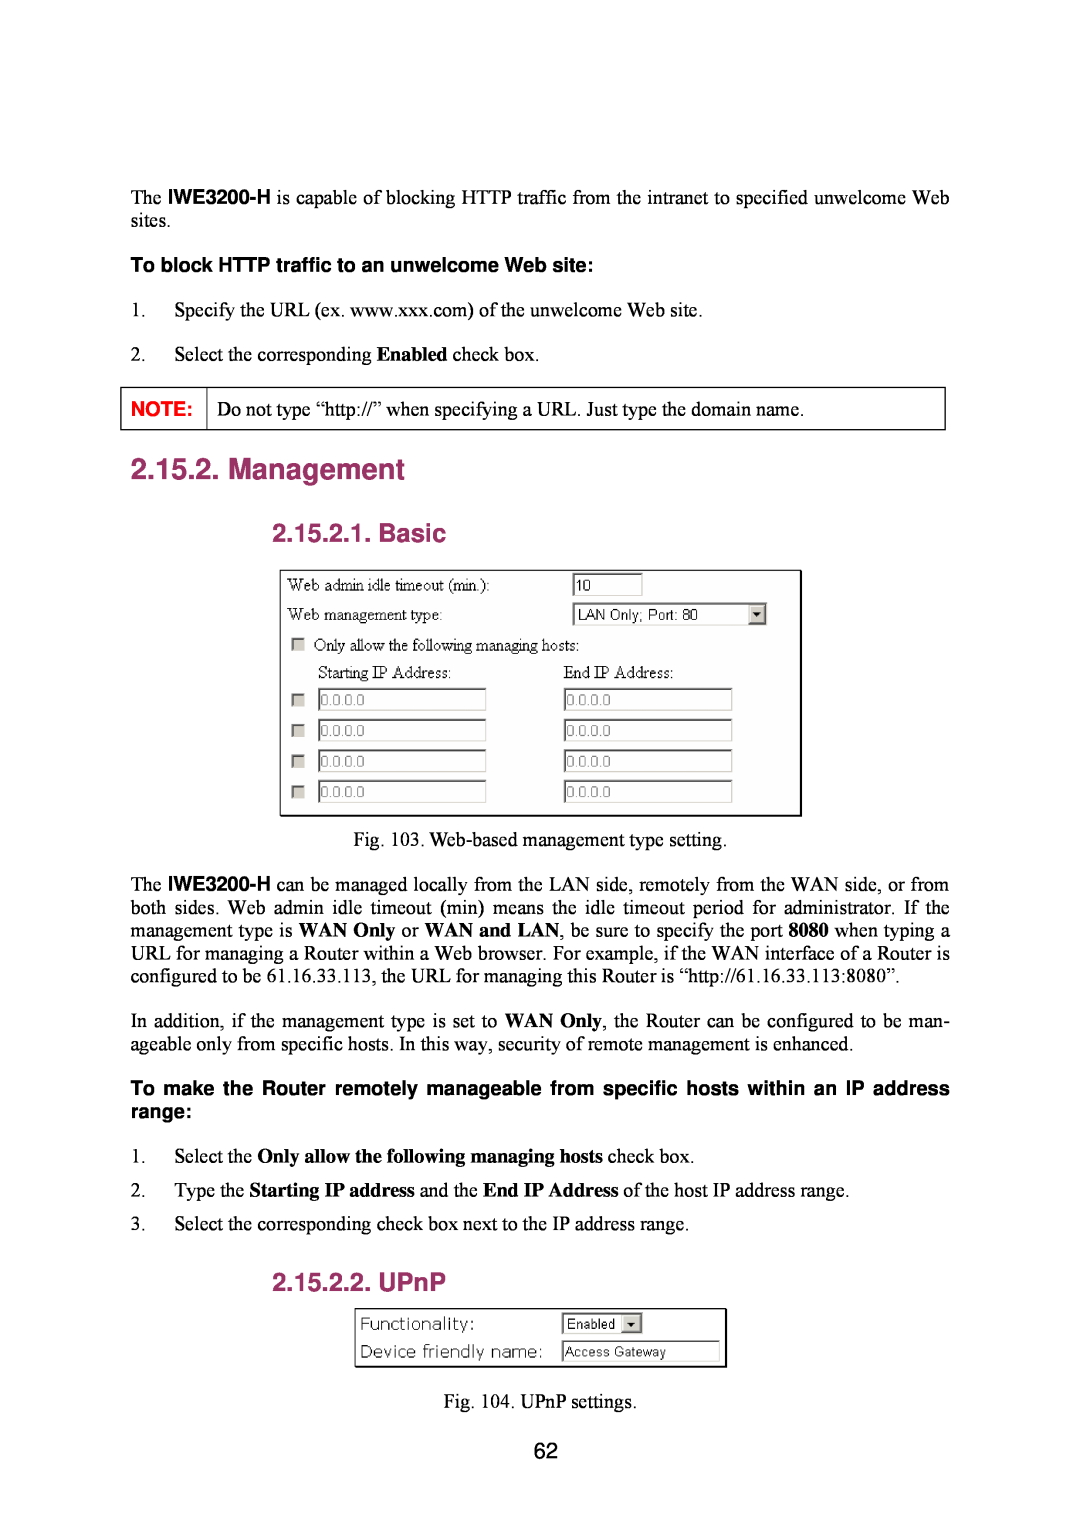 Epson IWE3200-H manual Management, Basic, UPnP, To block HTTP traffic to an unwelcome Web site 